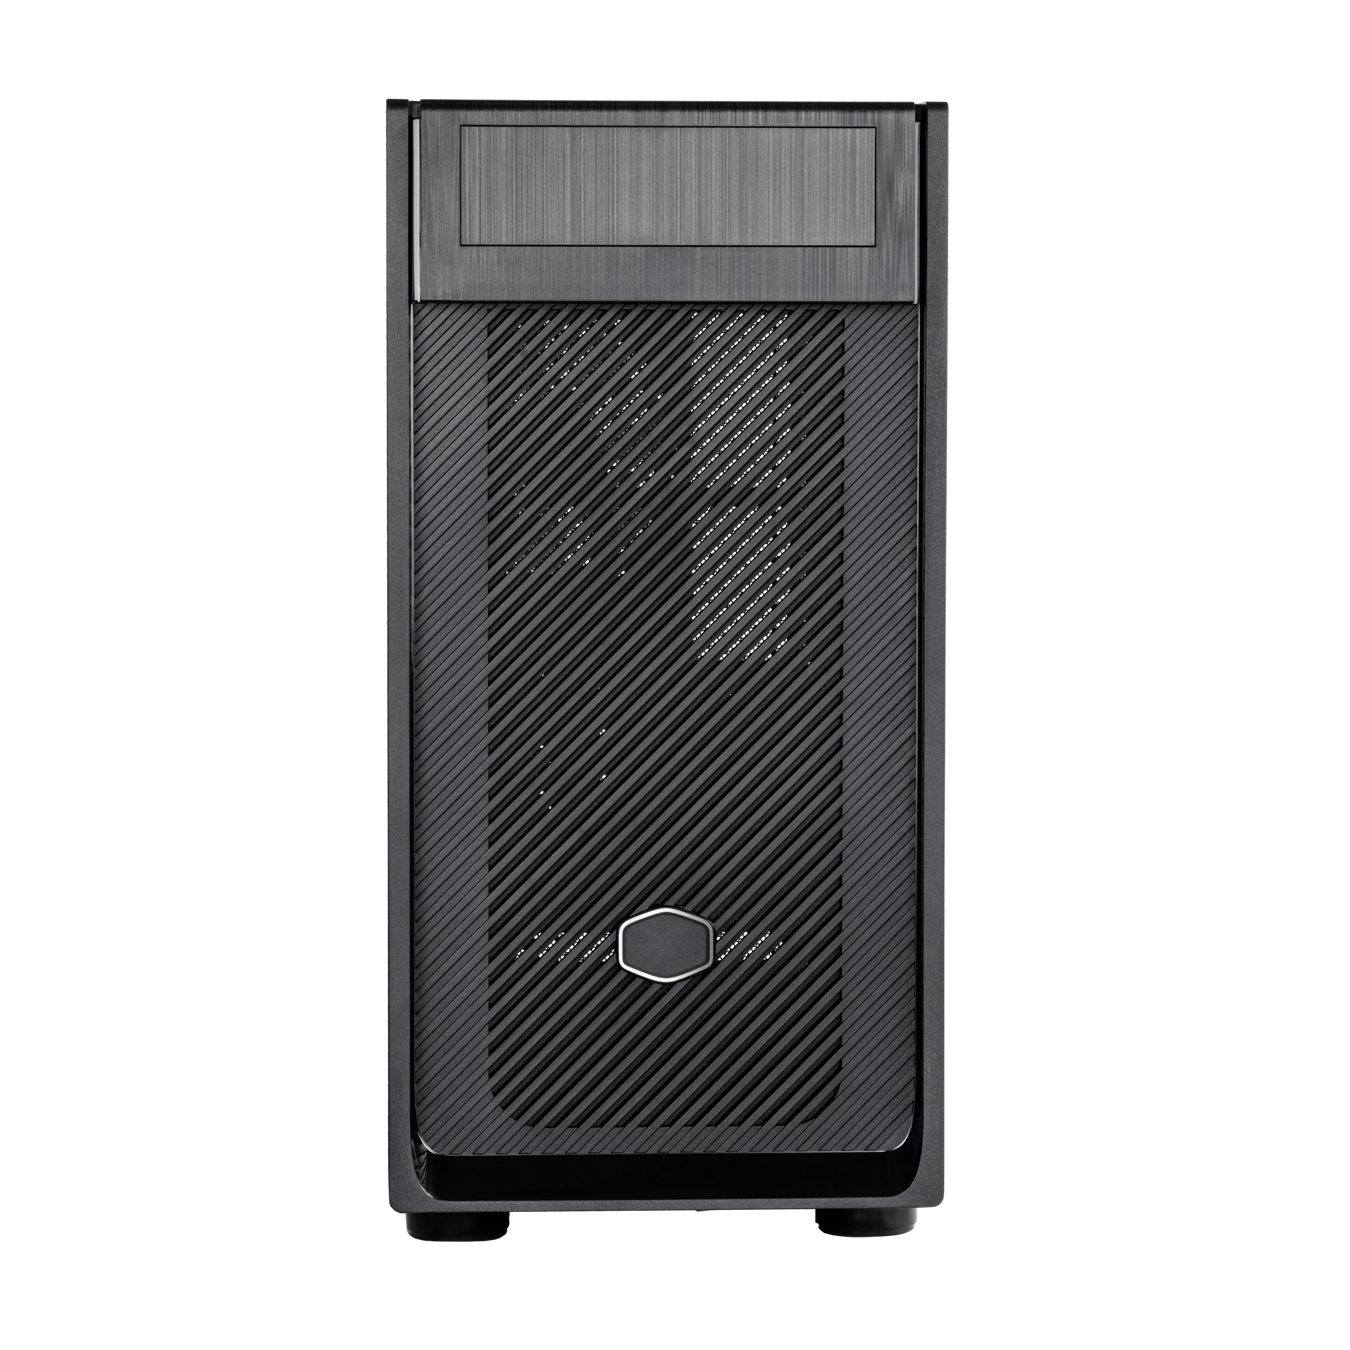 CoolerMaster E300-KN5N50-S00 Elite 300 Micro-ATX Tower Case with 500W Power Supply